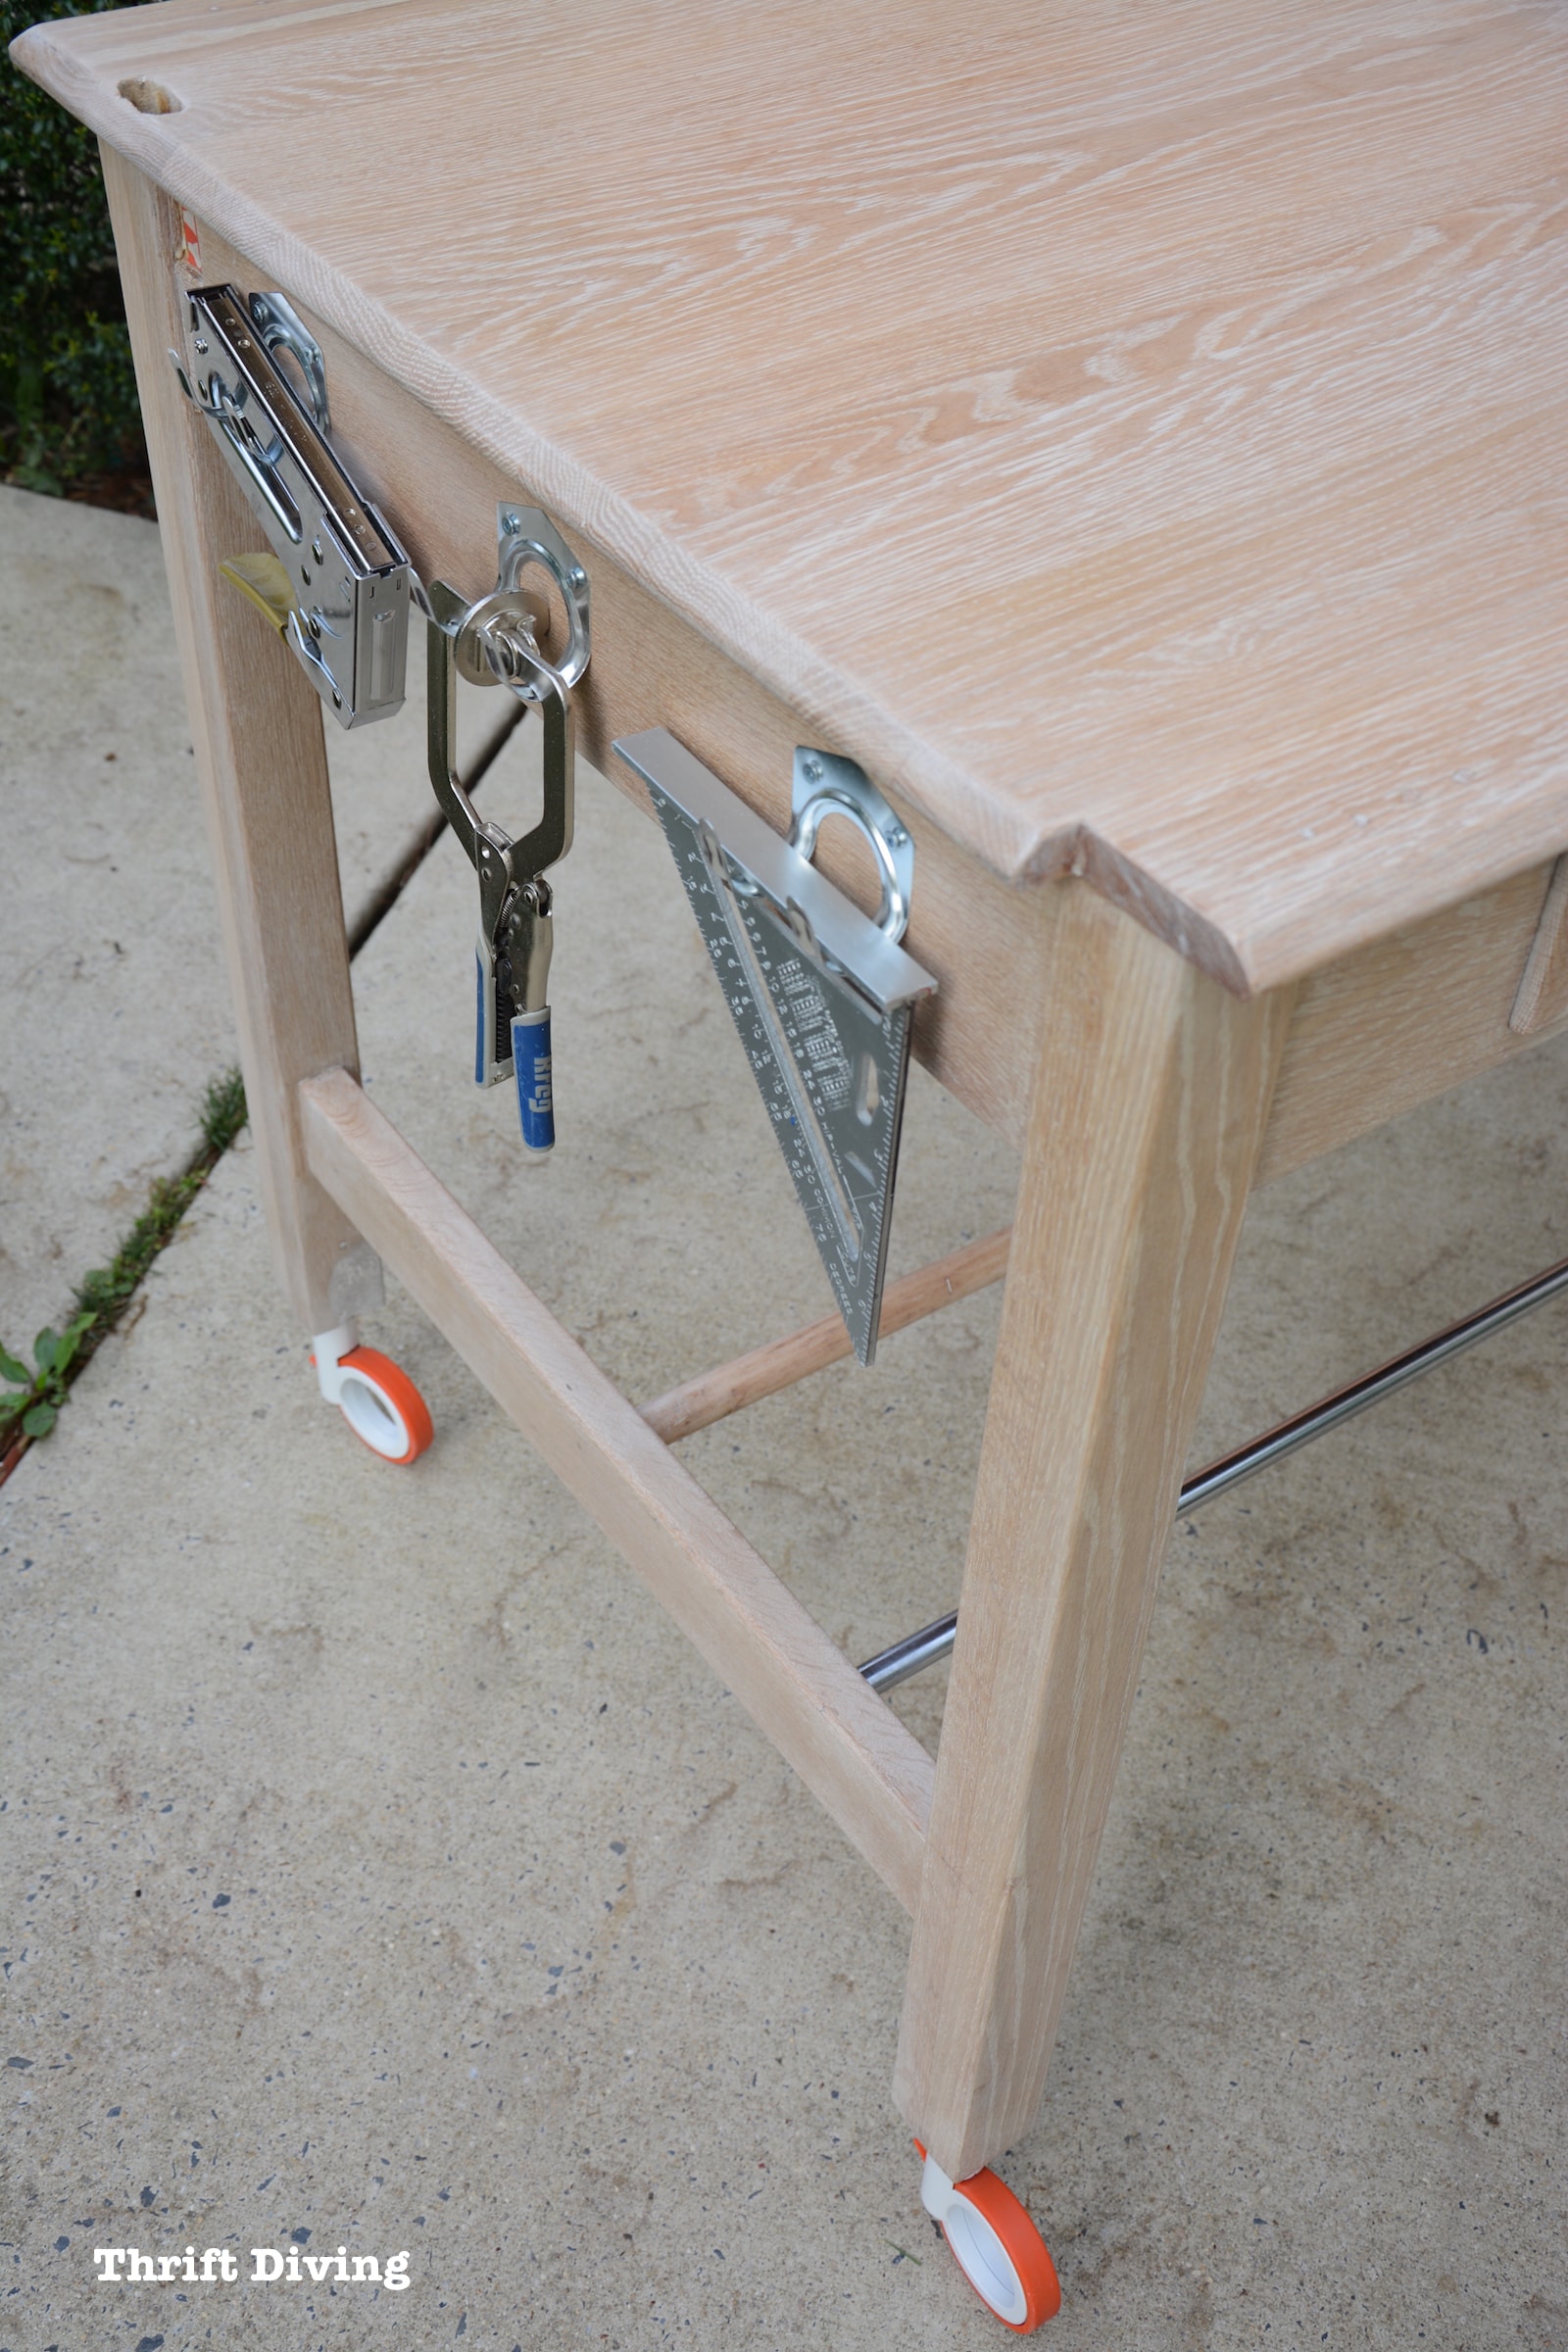 Strip furniture: turn an old thrifted drafting table into natural wood furniture - DIY garage workstation. | Thrift Diving